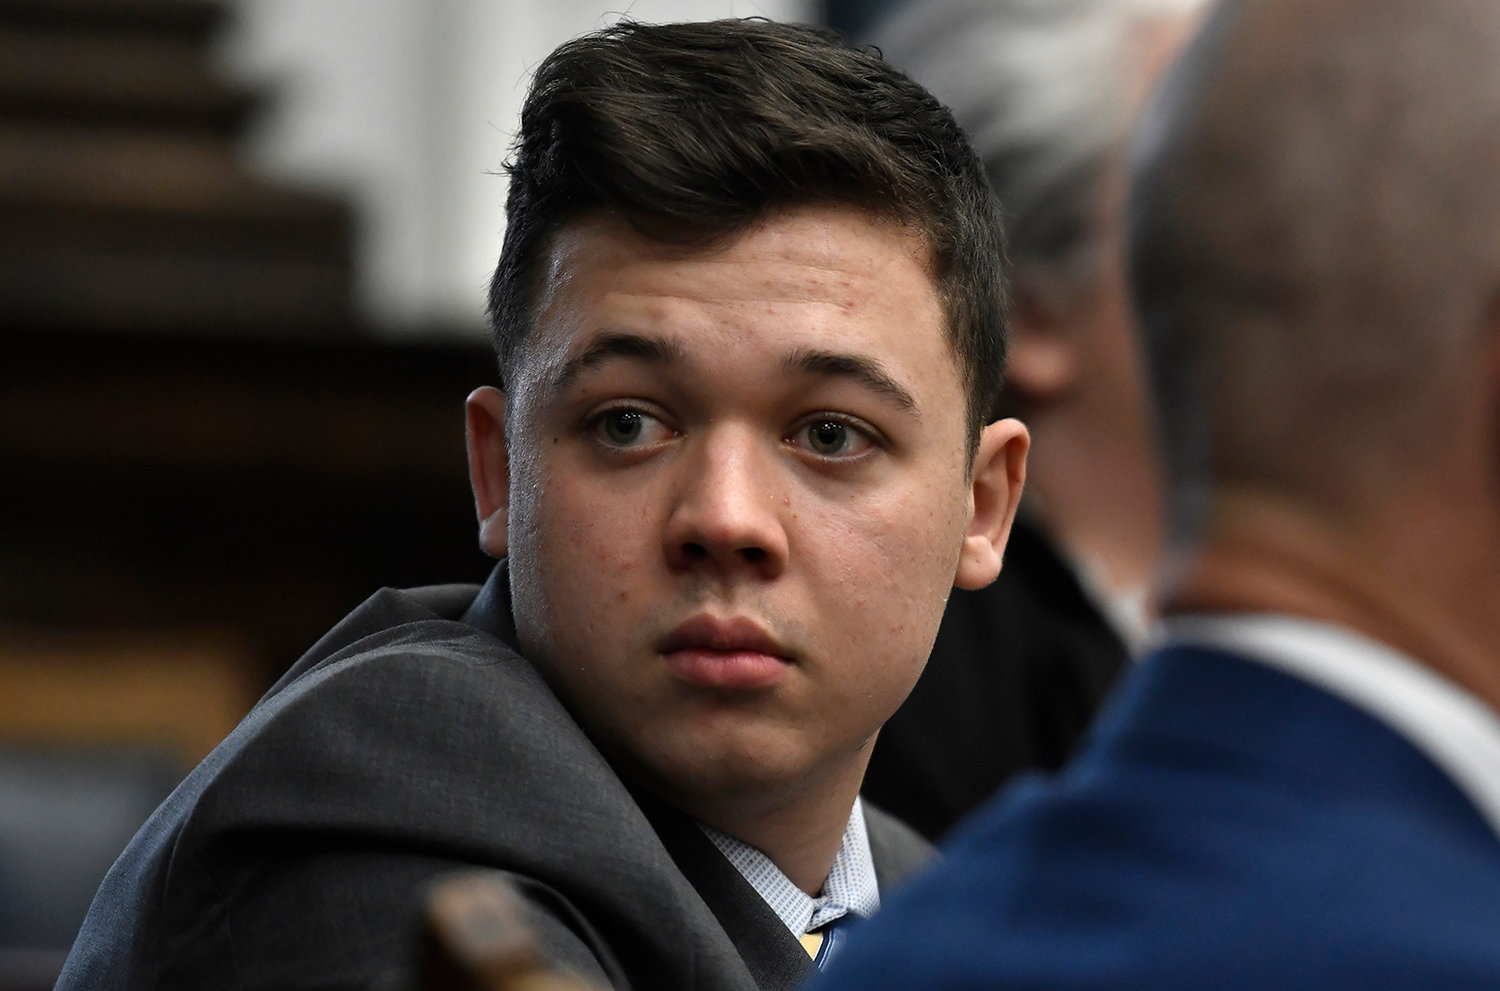 Kyle Rittenhouse looks back as attorneys discuss items in the motion for mistrial presented by his defense during his trial at the Kenosha County Courthouse on Nov. 17, 2021 in Kenosha, Wisconsin. (Sean Krajacic/Pool/Getty Images)